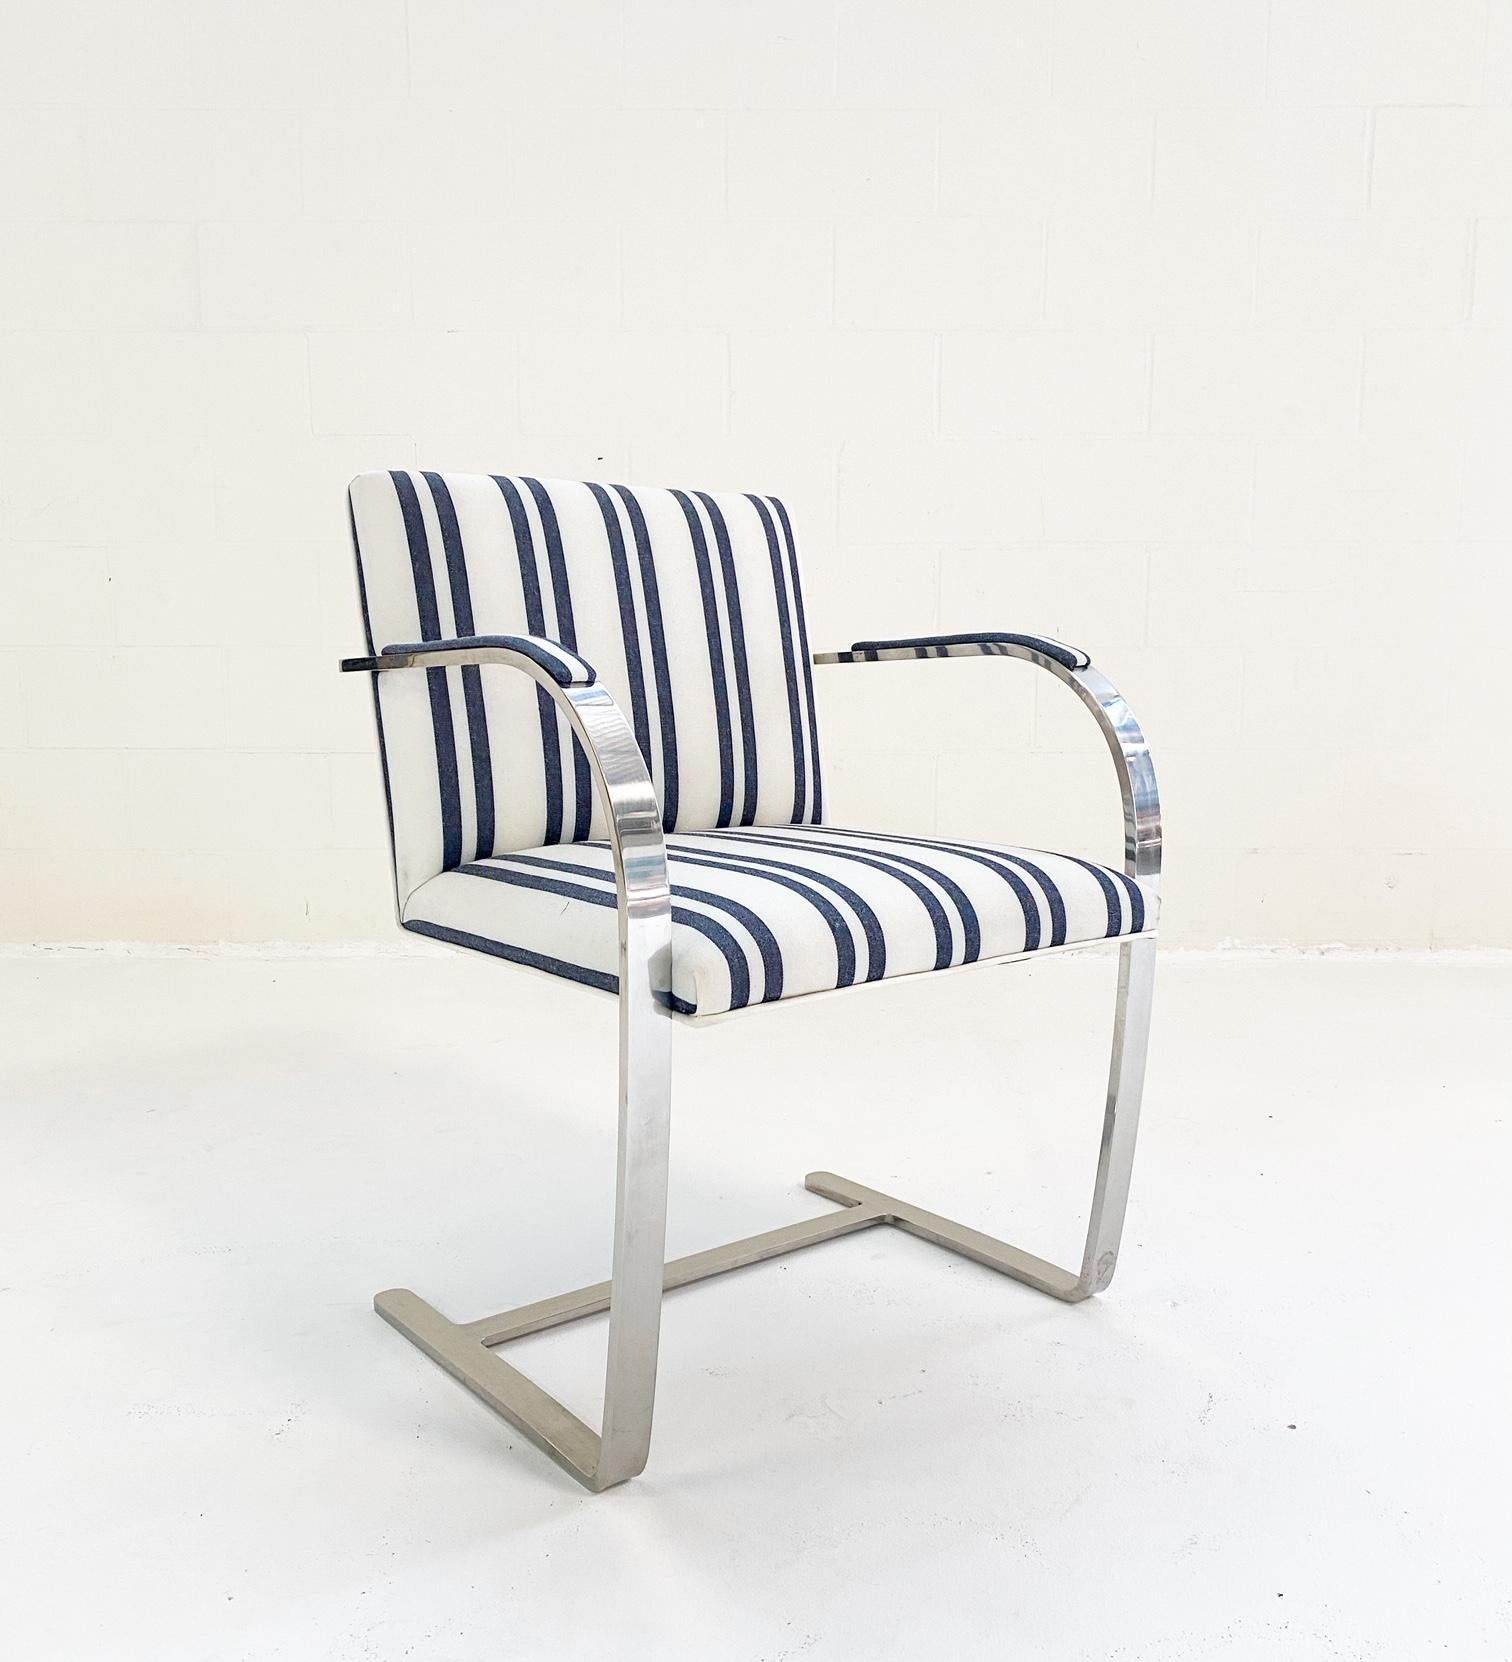 American Kule x Forsyth Collection Ludwig Mies van der Rohe Brno Chair